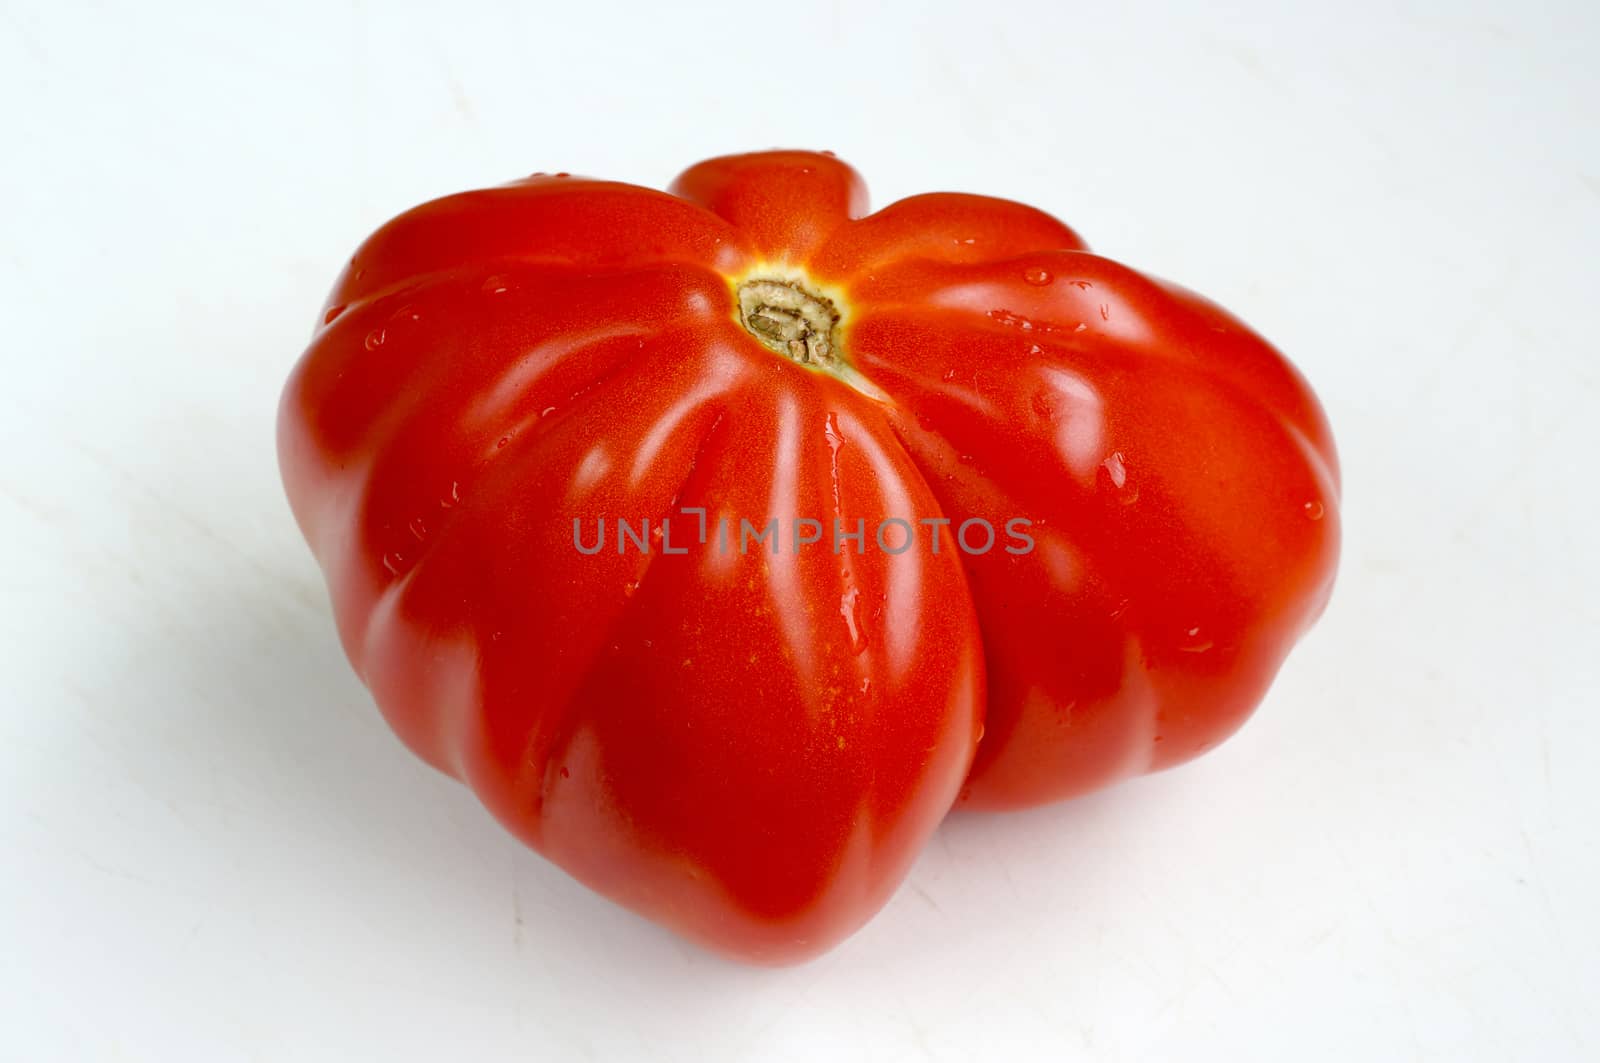 Red tomato of a grade of "Puzata Hata" by Vadimdem